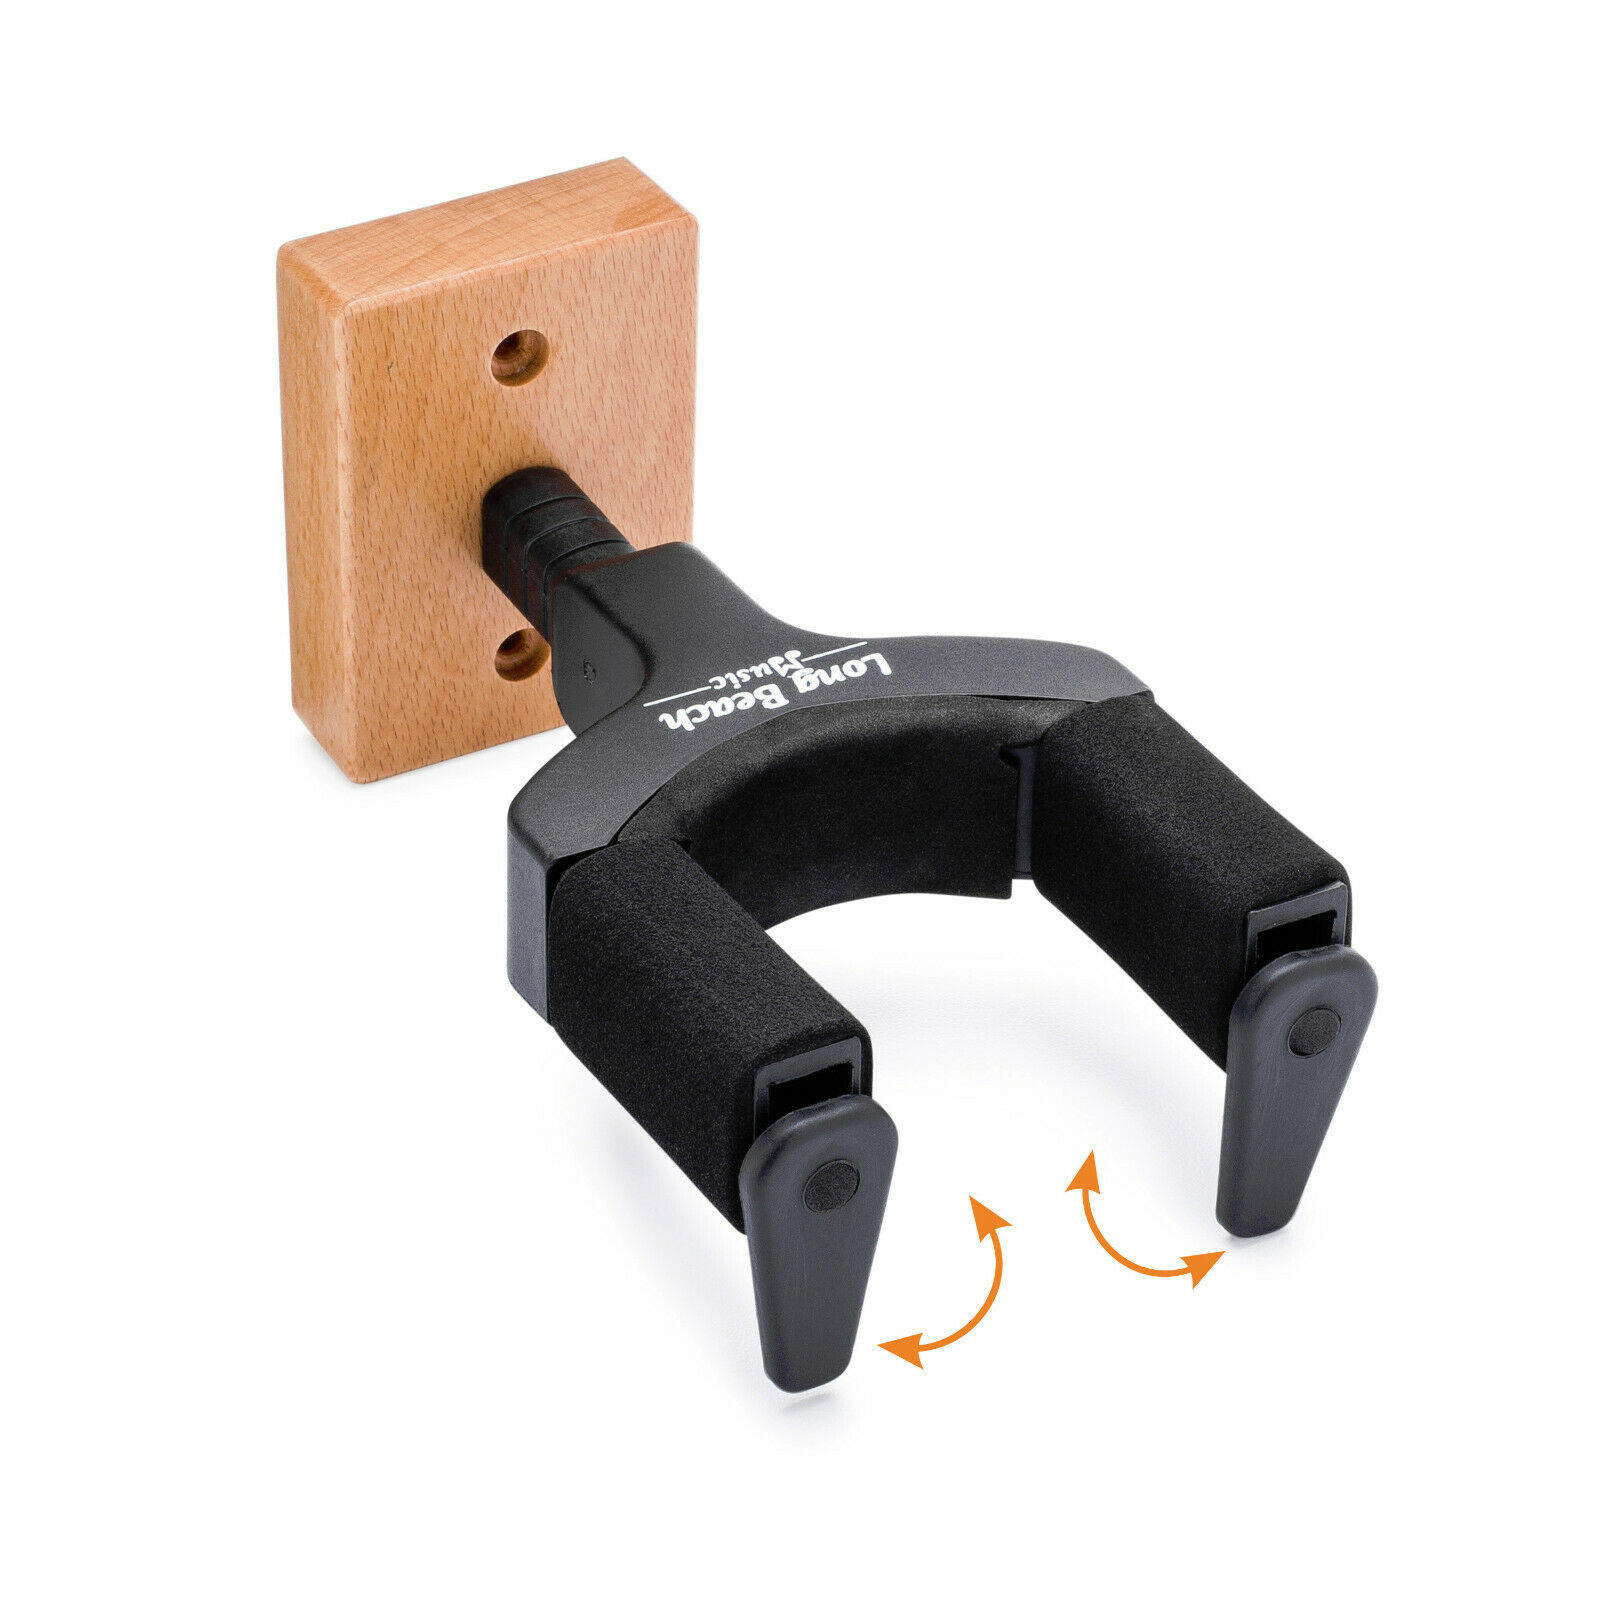 Guitar Hanger Wall Mount Stand With Auto Lock Tabs- Solid Wood Base